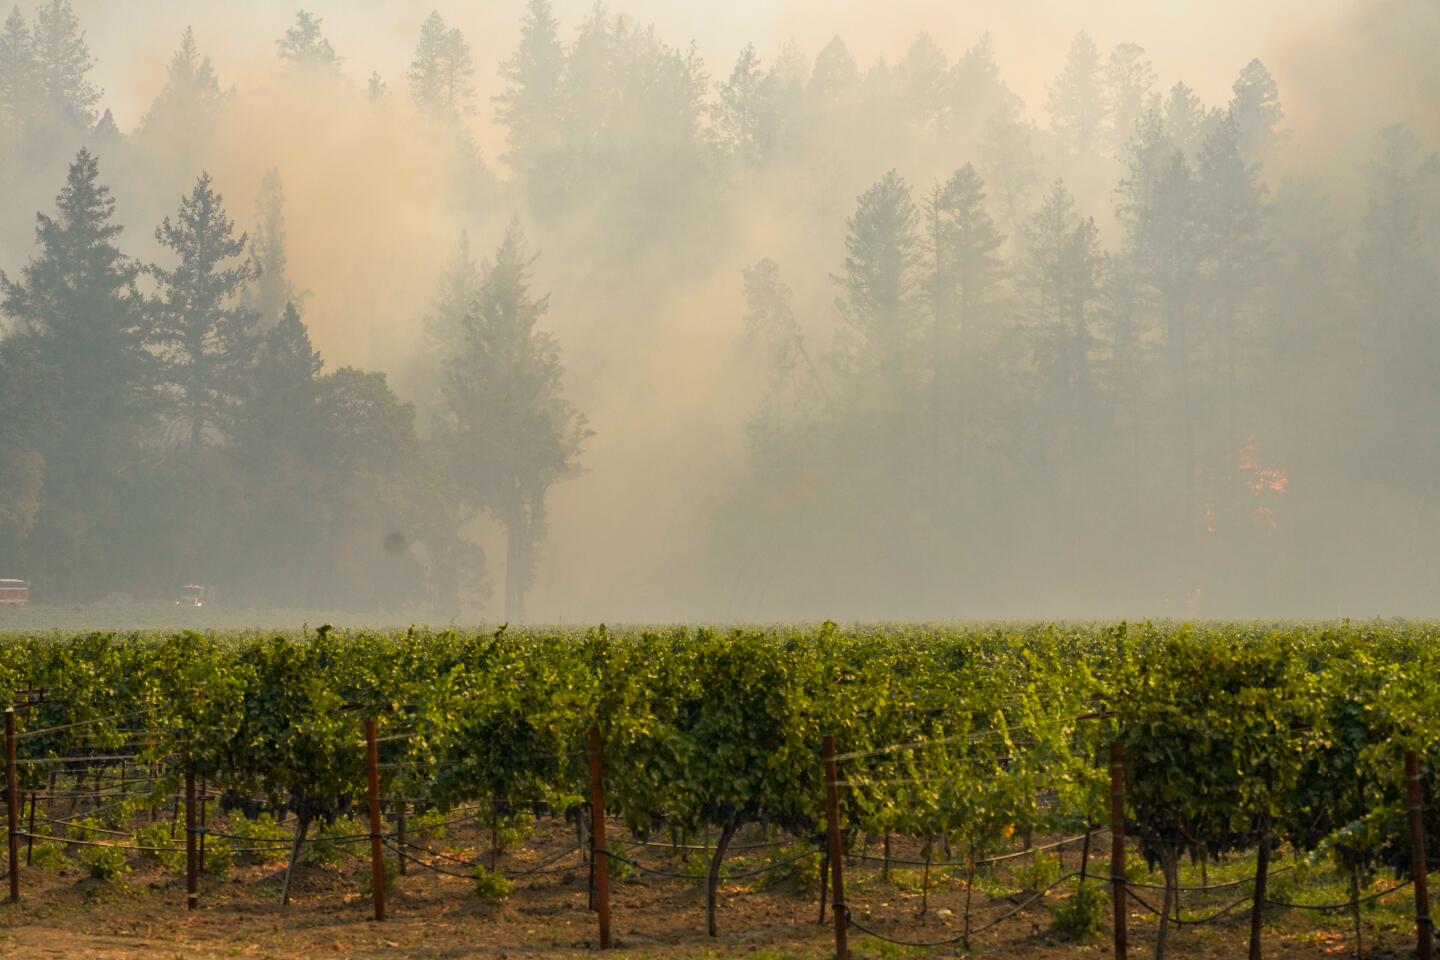 Smoke obscures the trees behind a vineyard.